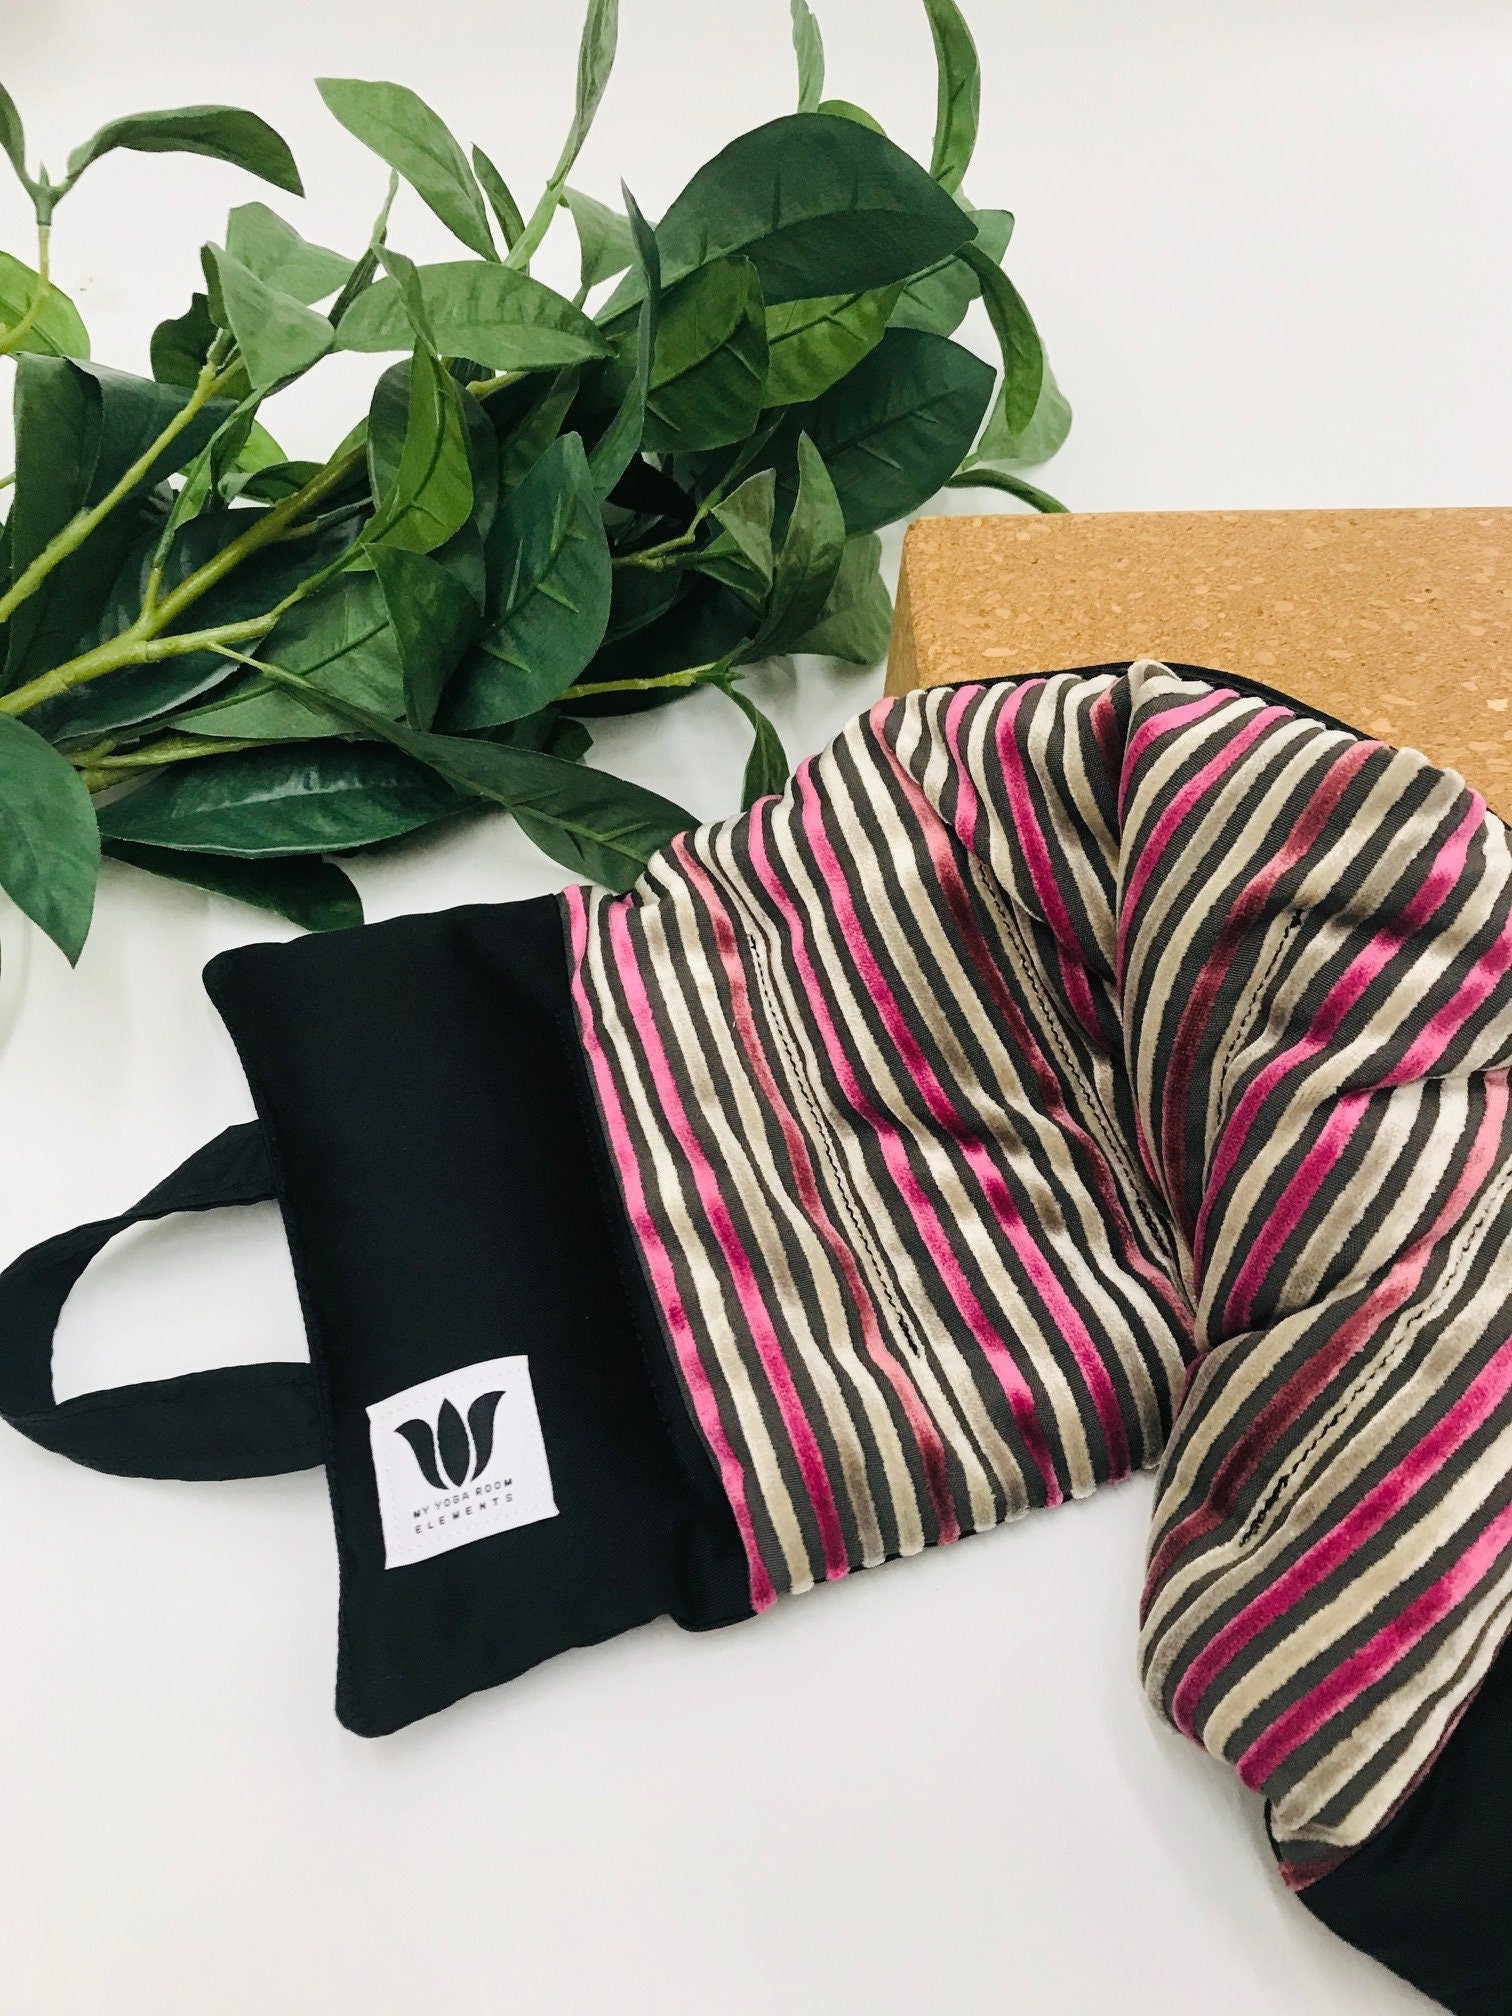 Yoga Sandbag version by My Yoga Room Elements. Add grounding to your practice with this heatable yoga prop. Handcrafted in Calgary in plush striped fabric.